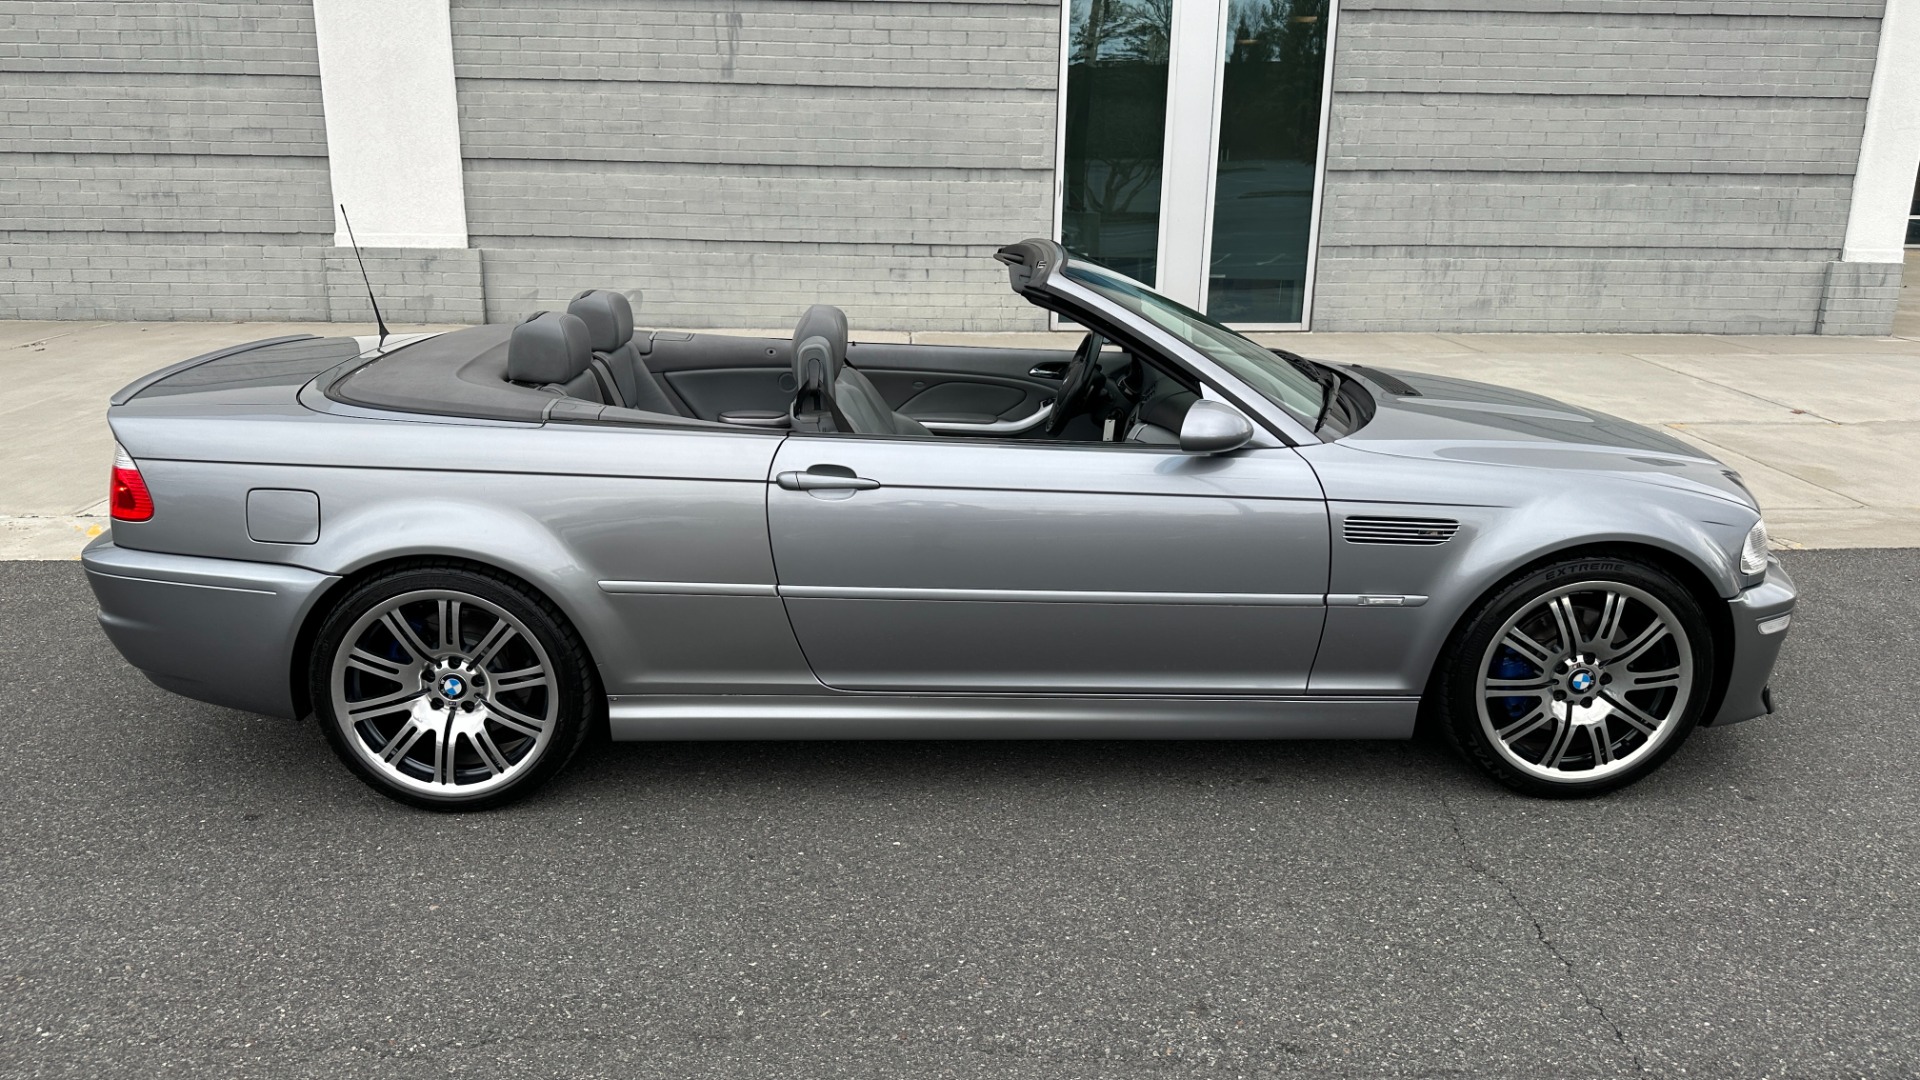 Used 2006 BMW 3 Series M3 CONVERTIBLE / SMG AUTO / LEATHER / INLINE 6CYL / CARBON FIBER for sale Sold at Formula Imports in Charlotte NC 28227 3